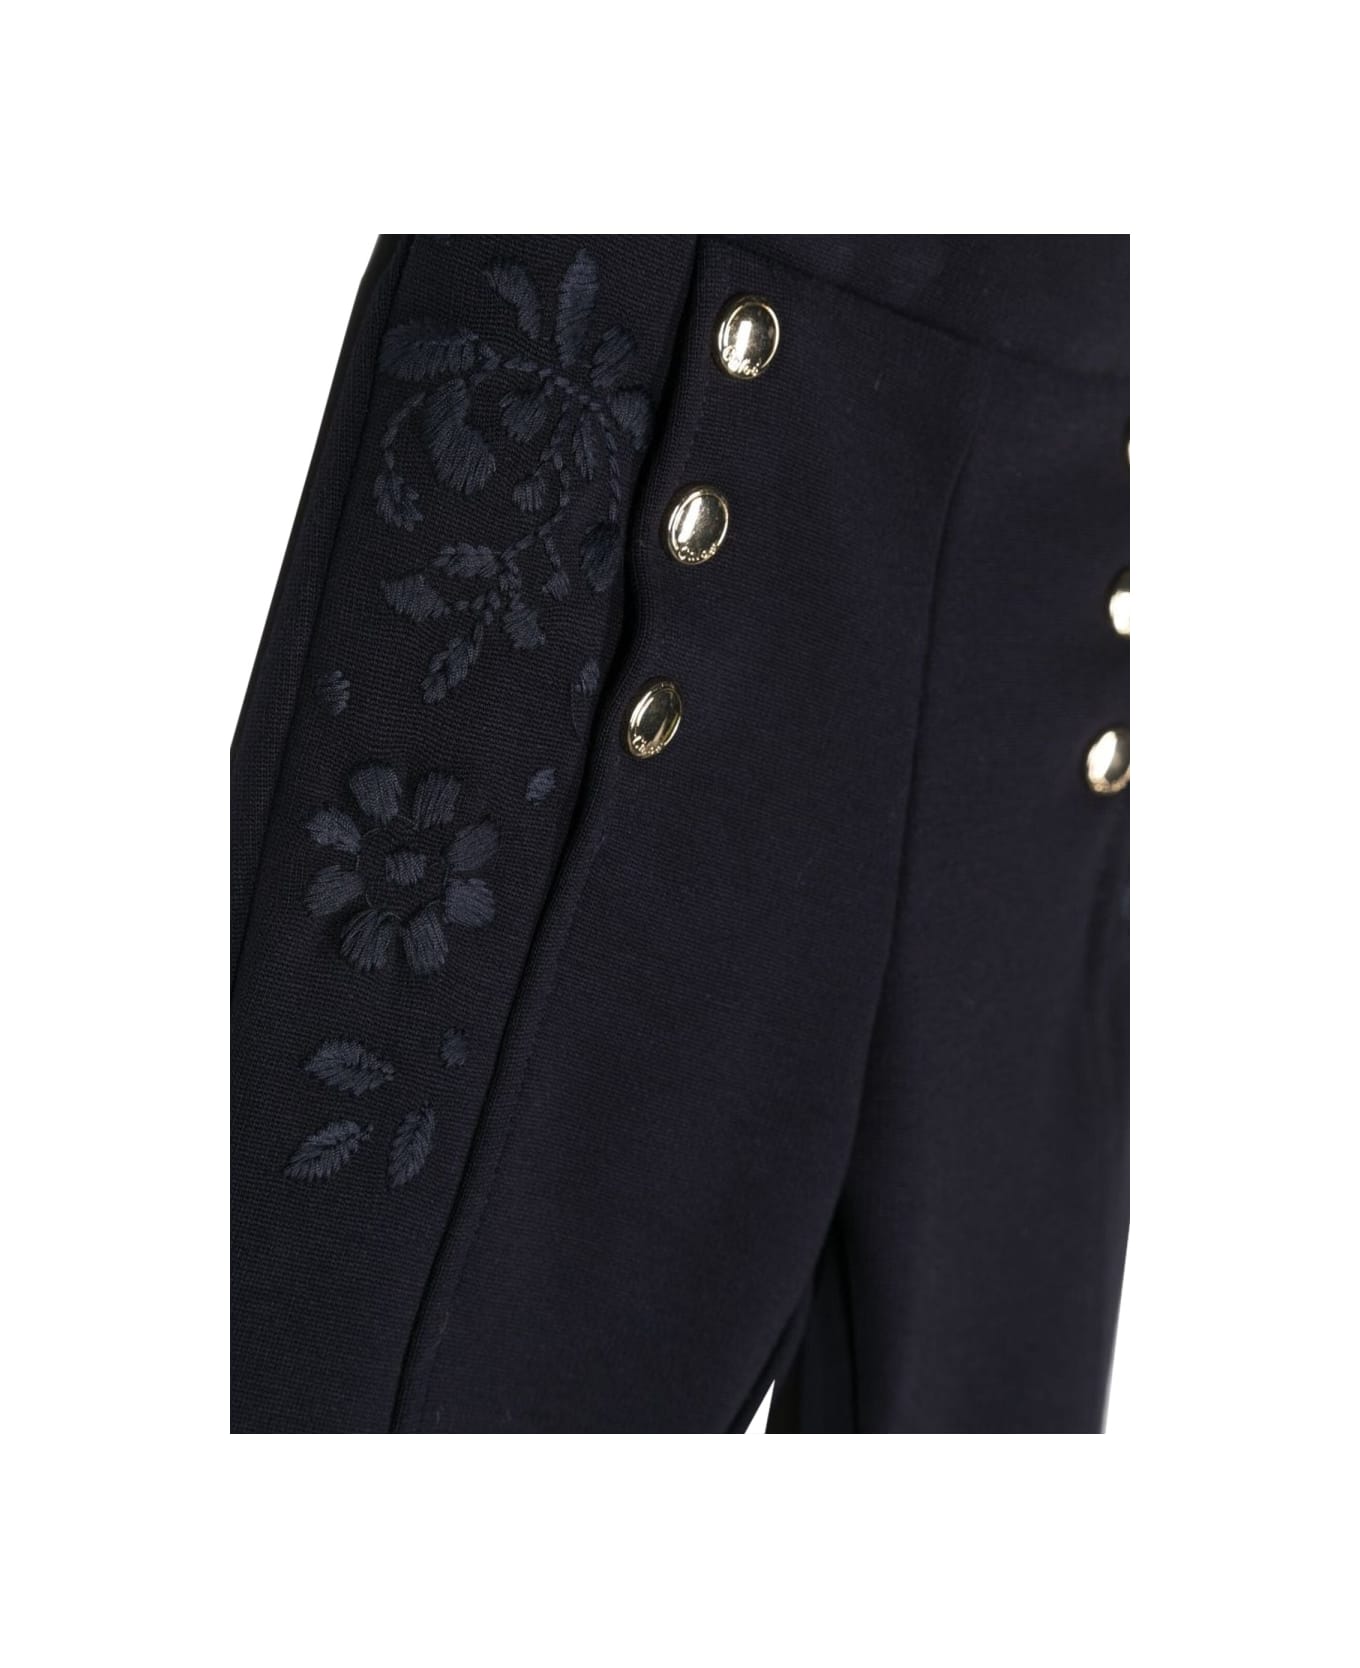 Chloé Pants 6 Buttons - BLUE ボトムス